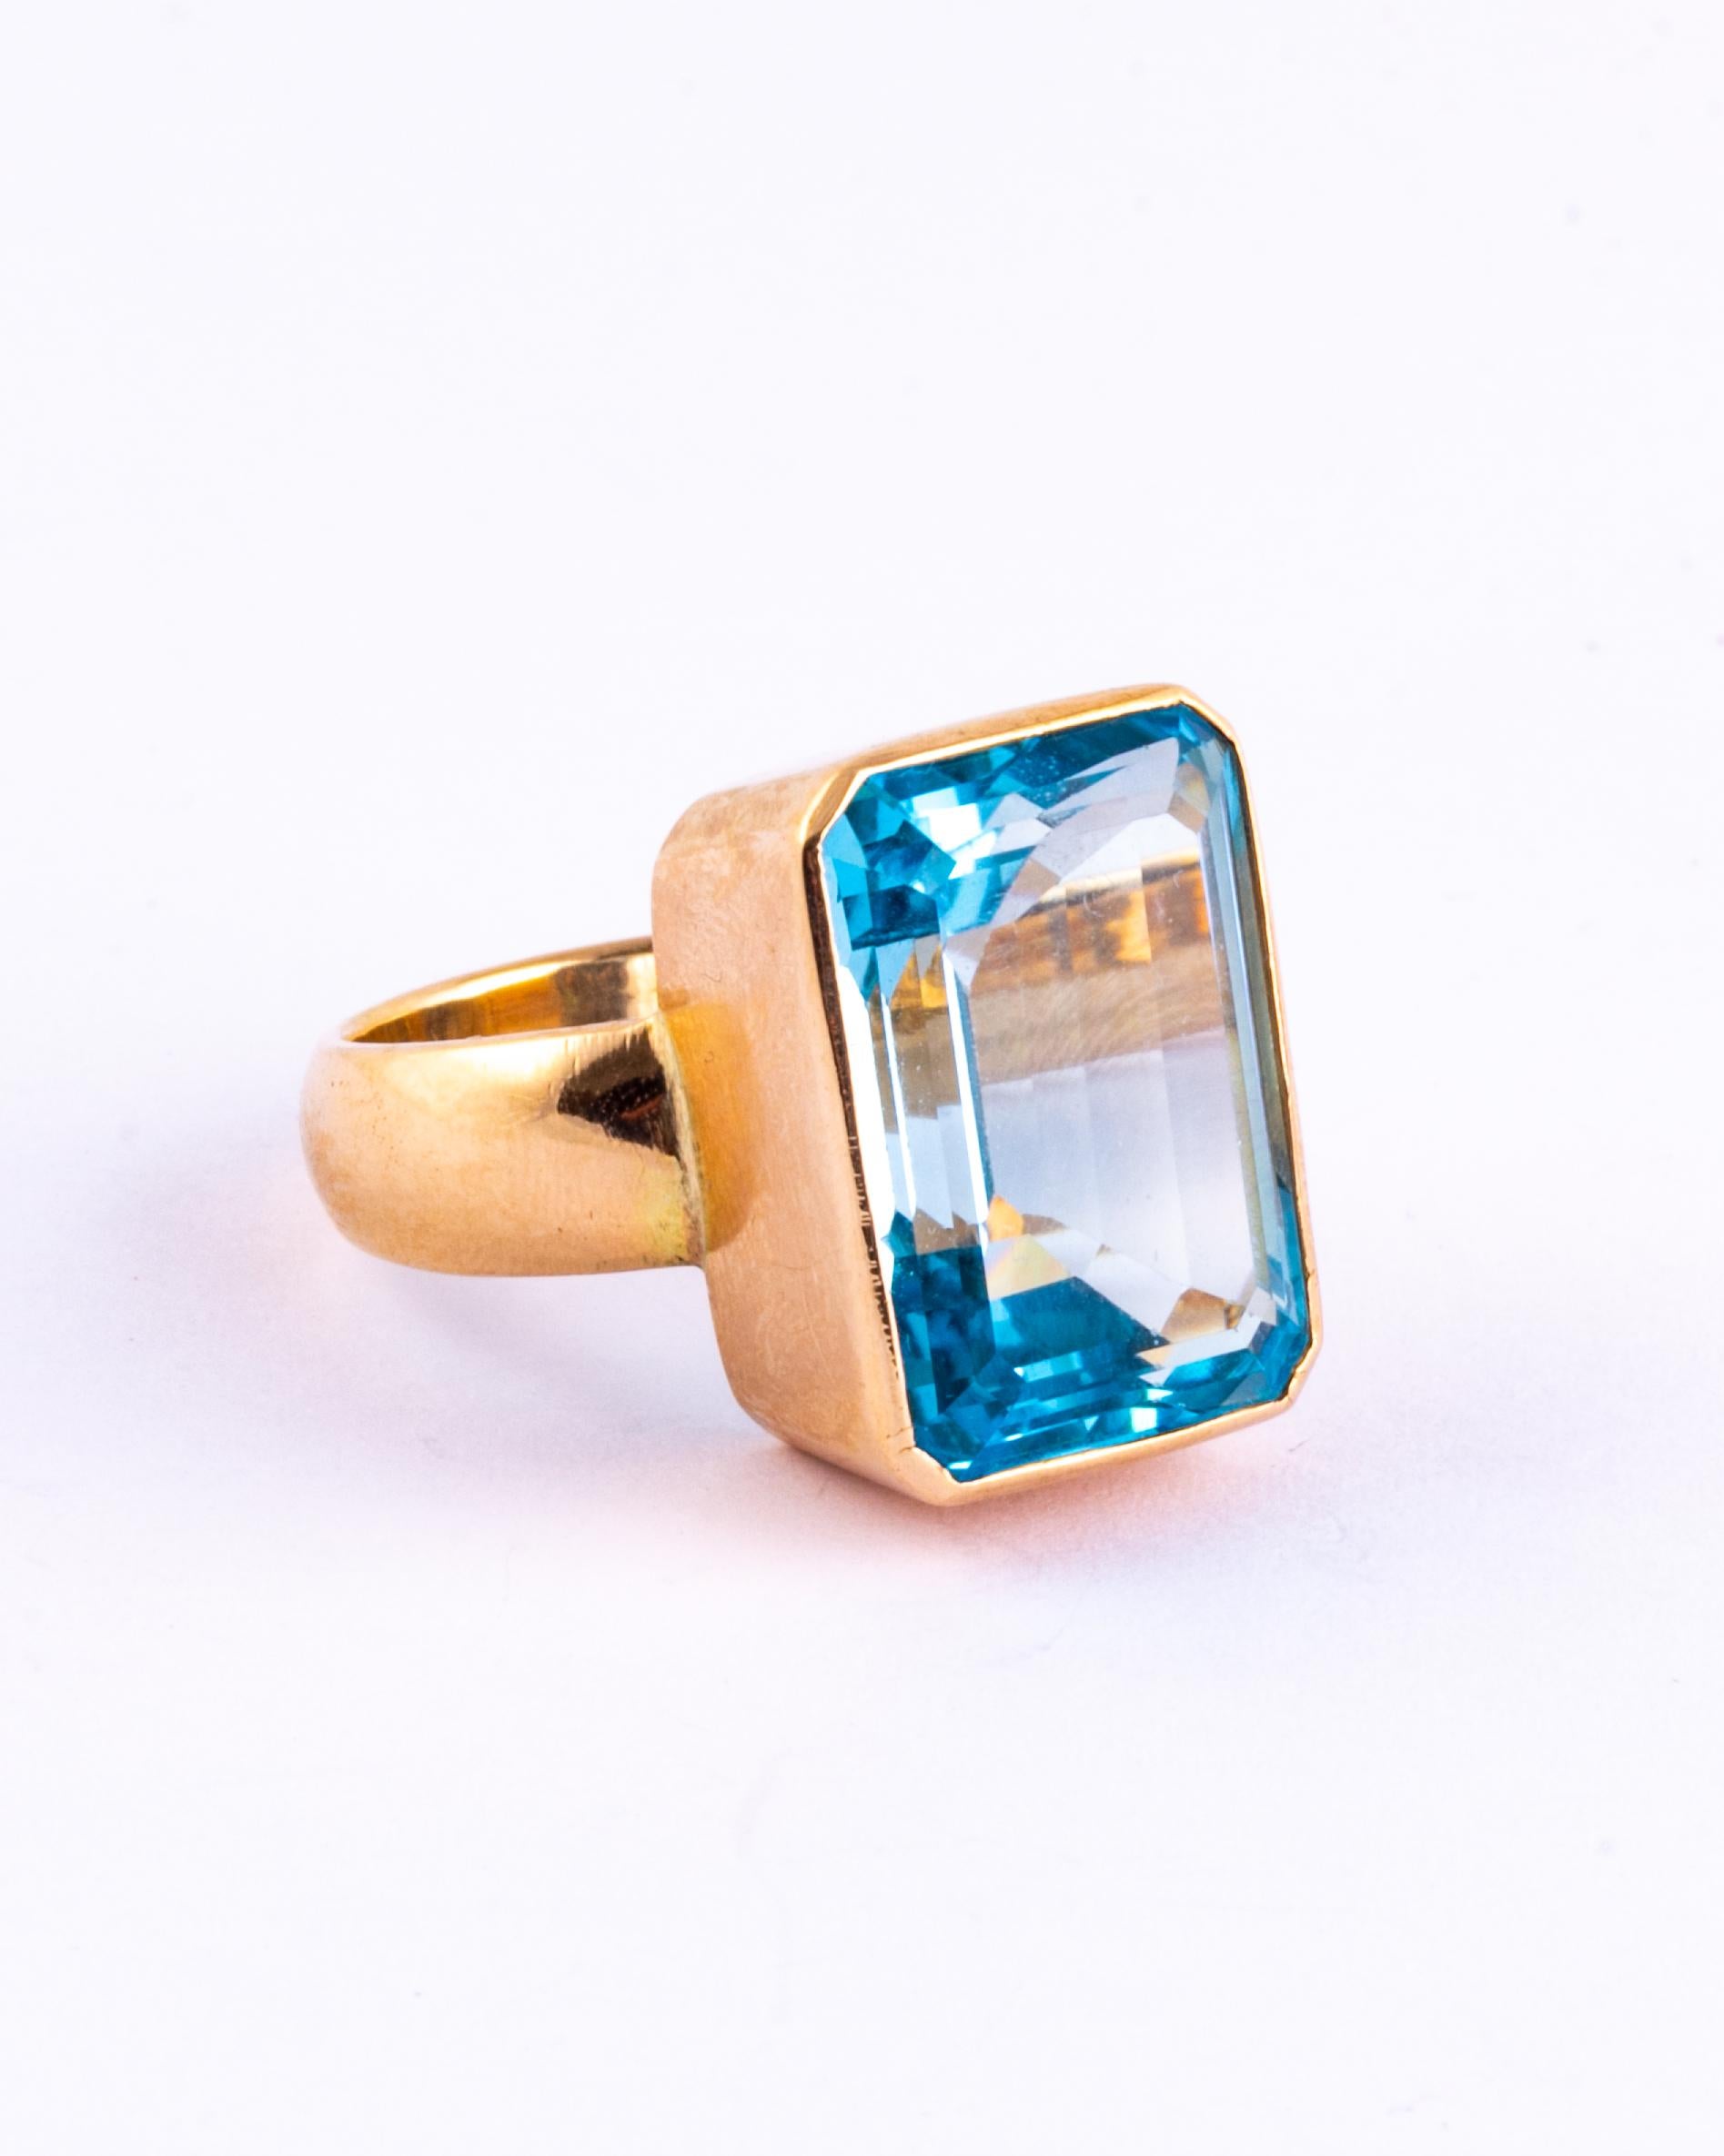 What a show stopper! The bright blue topaz is emerald cut and reflects the light beautifully and shows off the colour of the stone. The extra wide 9 carat gold band sweeps up and encases the stone and becomes the setting in which it sits.  

Ring